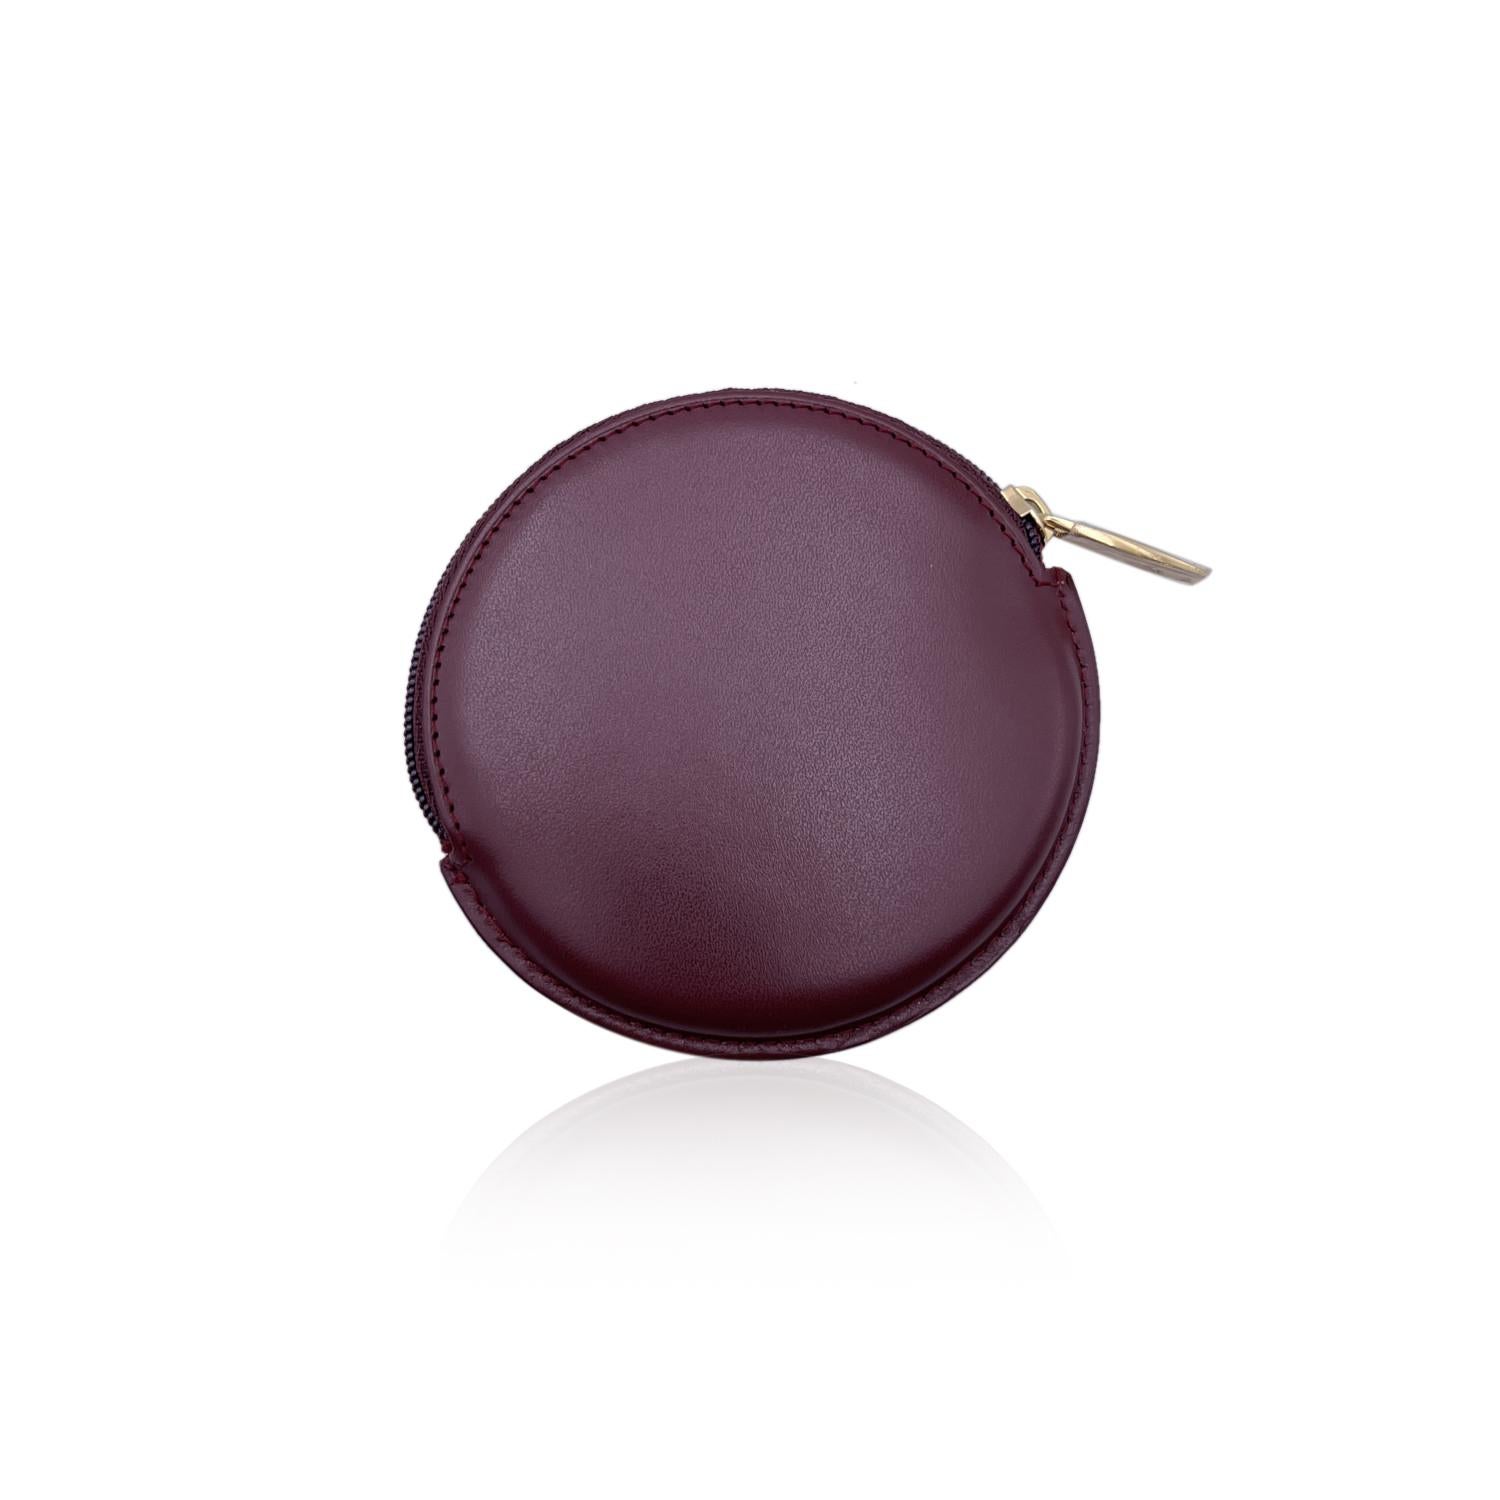 Burgundy leather Cartier round coin purse. Cartier logo embossed on the front. Upper zipper closure. Burgundy interior. 'Cartier Paris' embossed inside.






Details

MATERIAL: Leather

COLOR: Burgundy

MODEL: -

GENDER: Women

COUNTRY OF